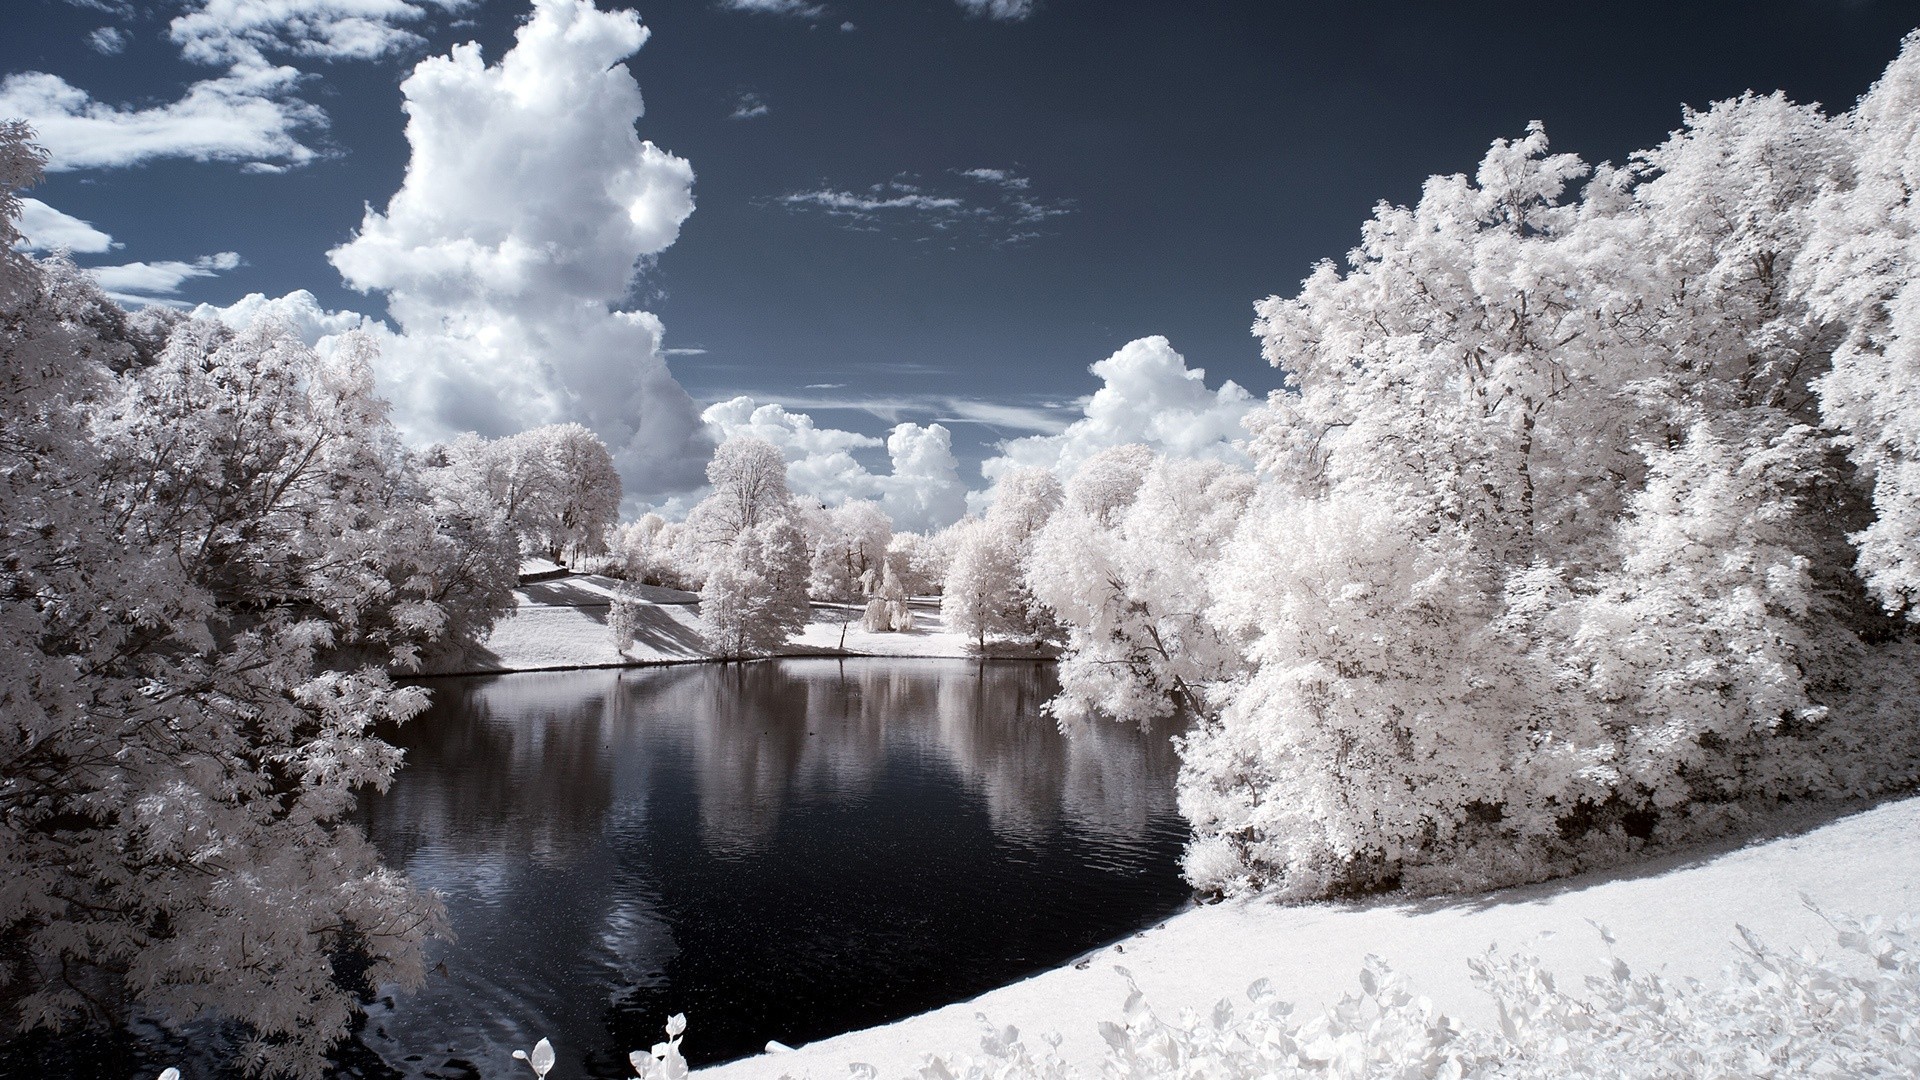 General 1920x1080 simple background minimalism lake pond nature snow trees landscape infrared clouds winter cold ice